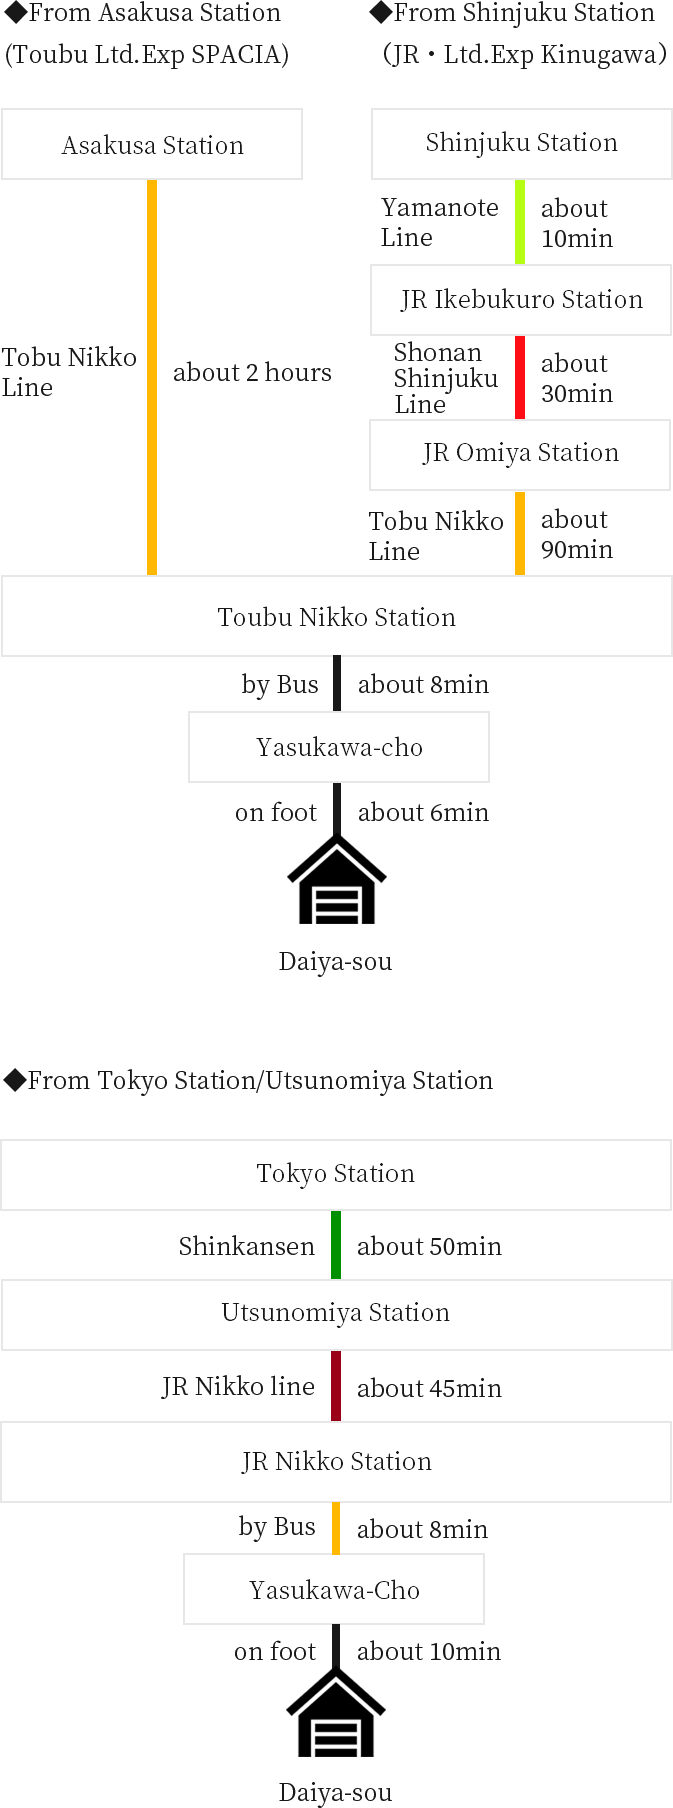 Approximately 14 minutes by bus from Tobu Nikko Station and JR Nikko Station.